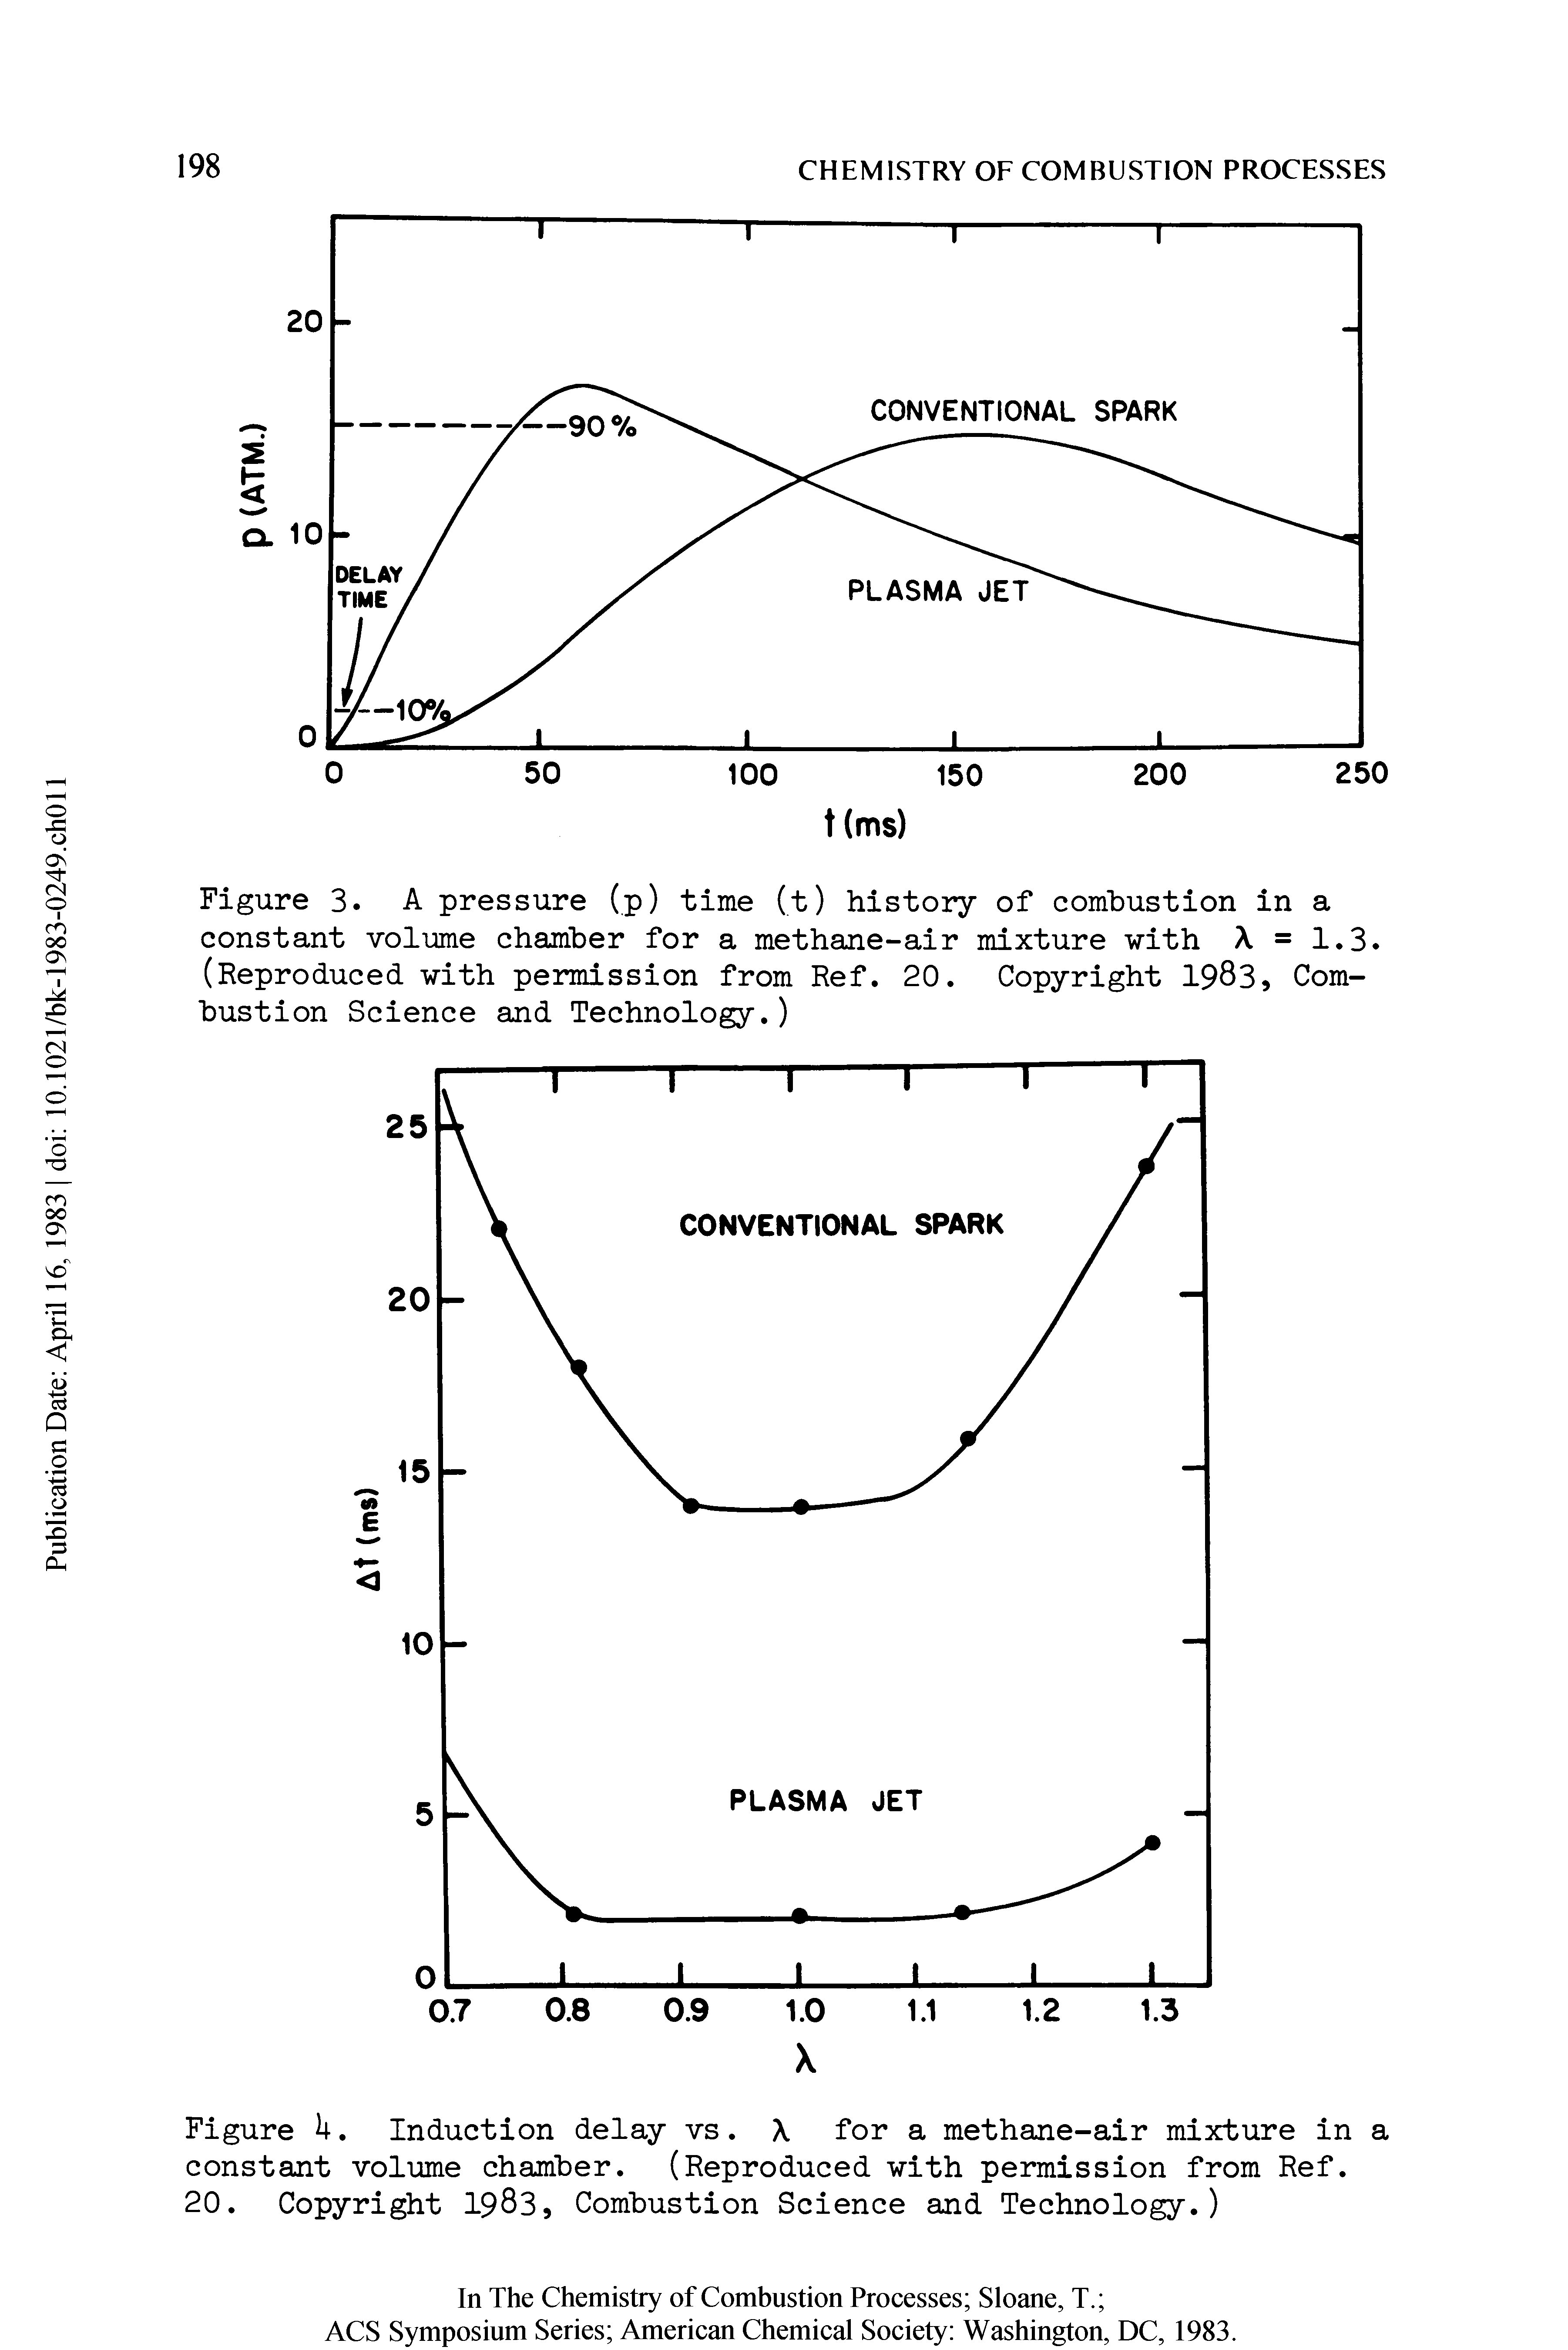 Figure 3. A pressure (p) time (t) history of combustion in a constant volume chamber for a methane-air mixture with X = 1.3. (Reproduced with permission from Ref. 20. Copyright 1983, Combustion Science and Technology.)...